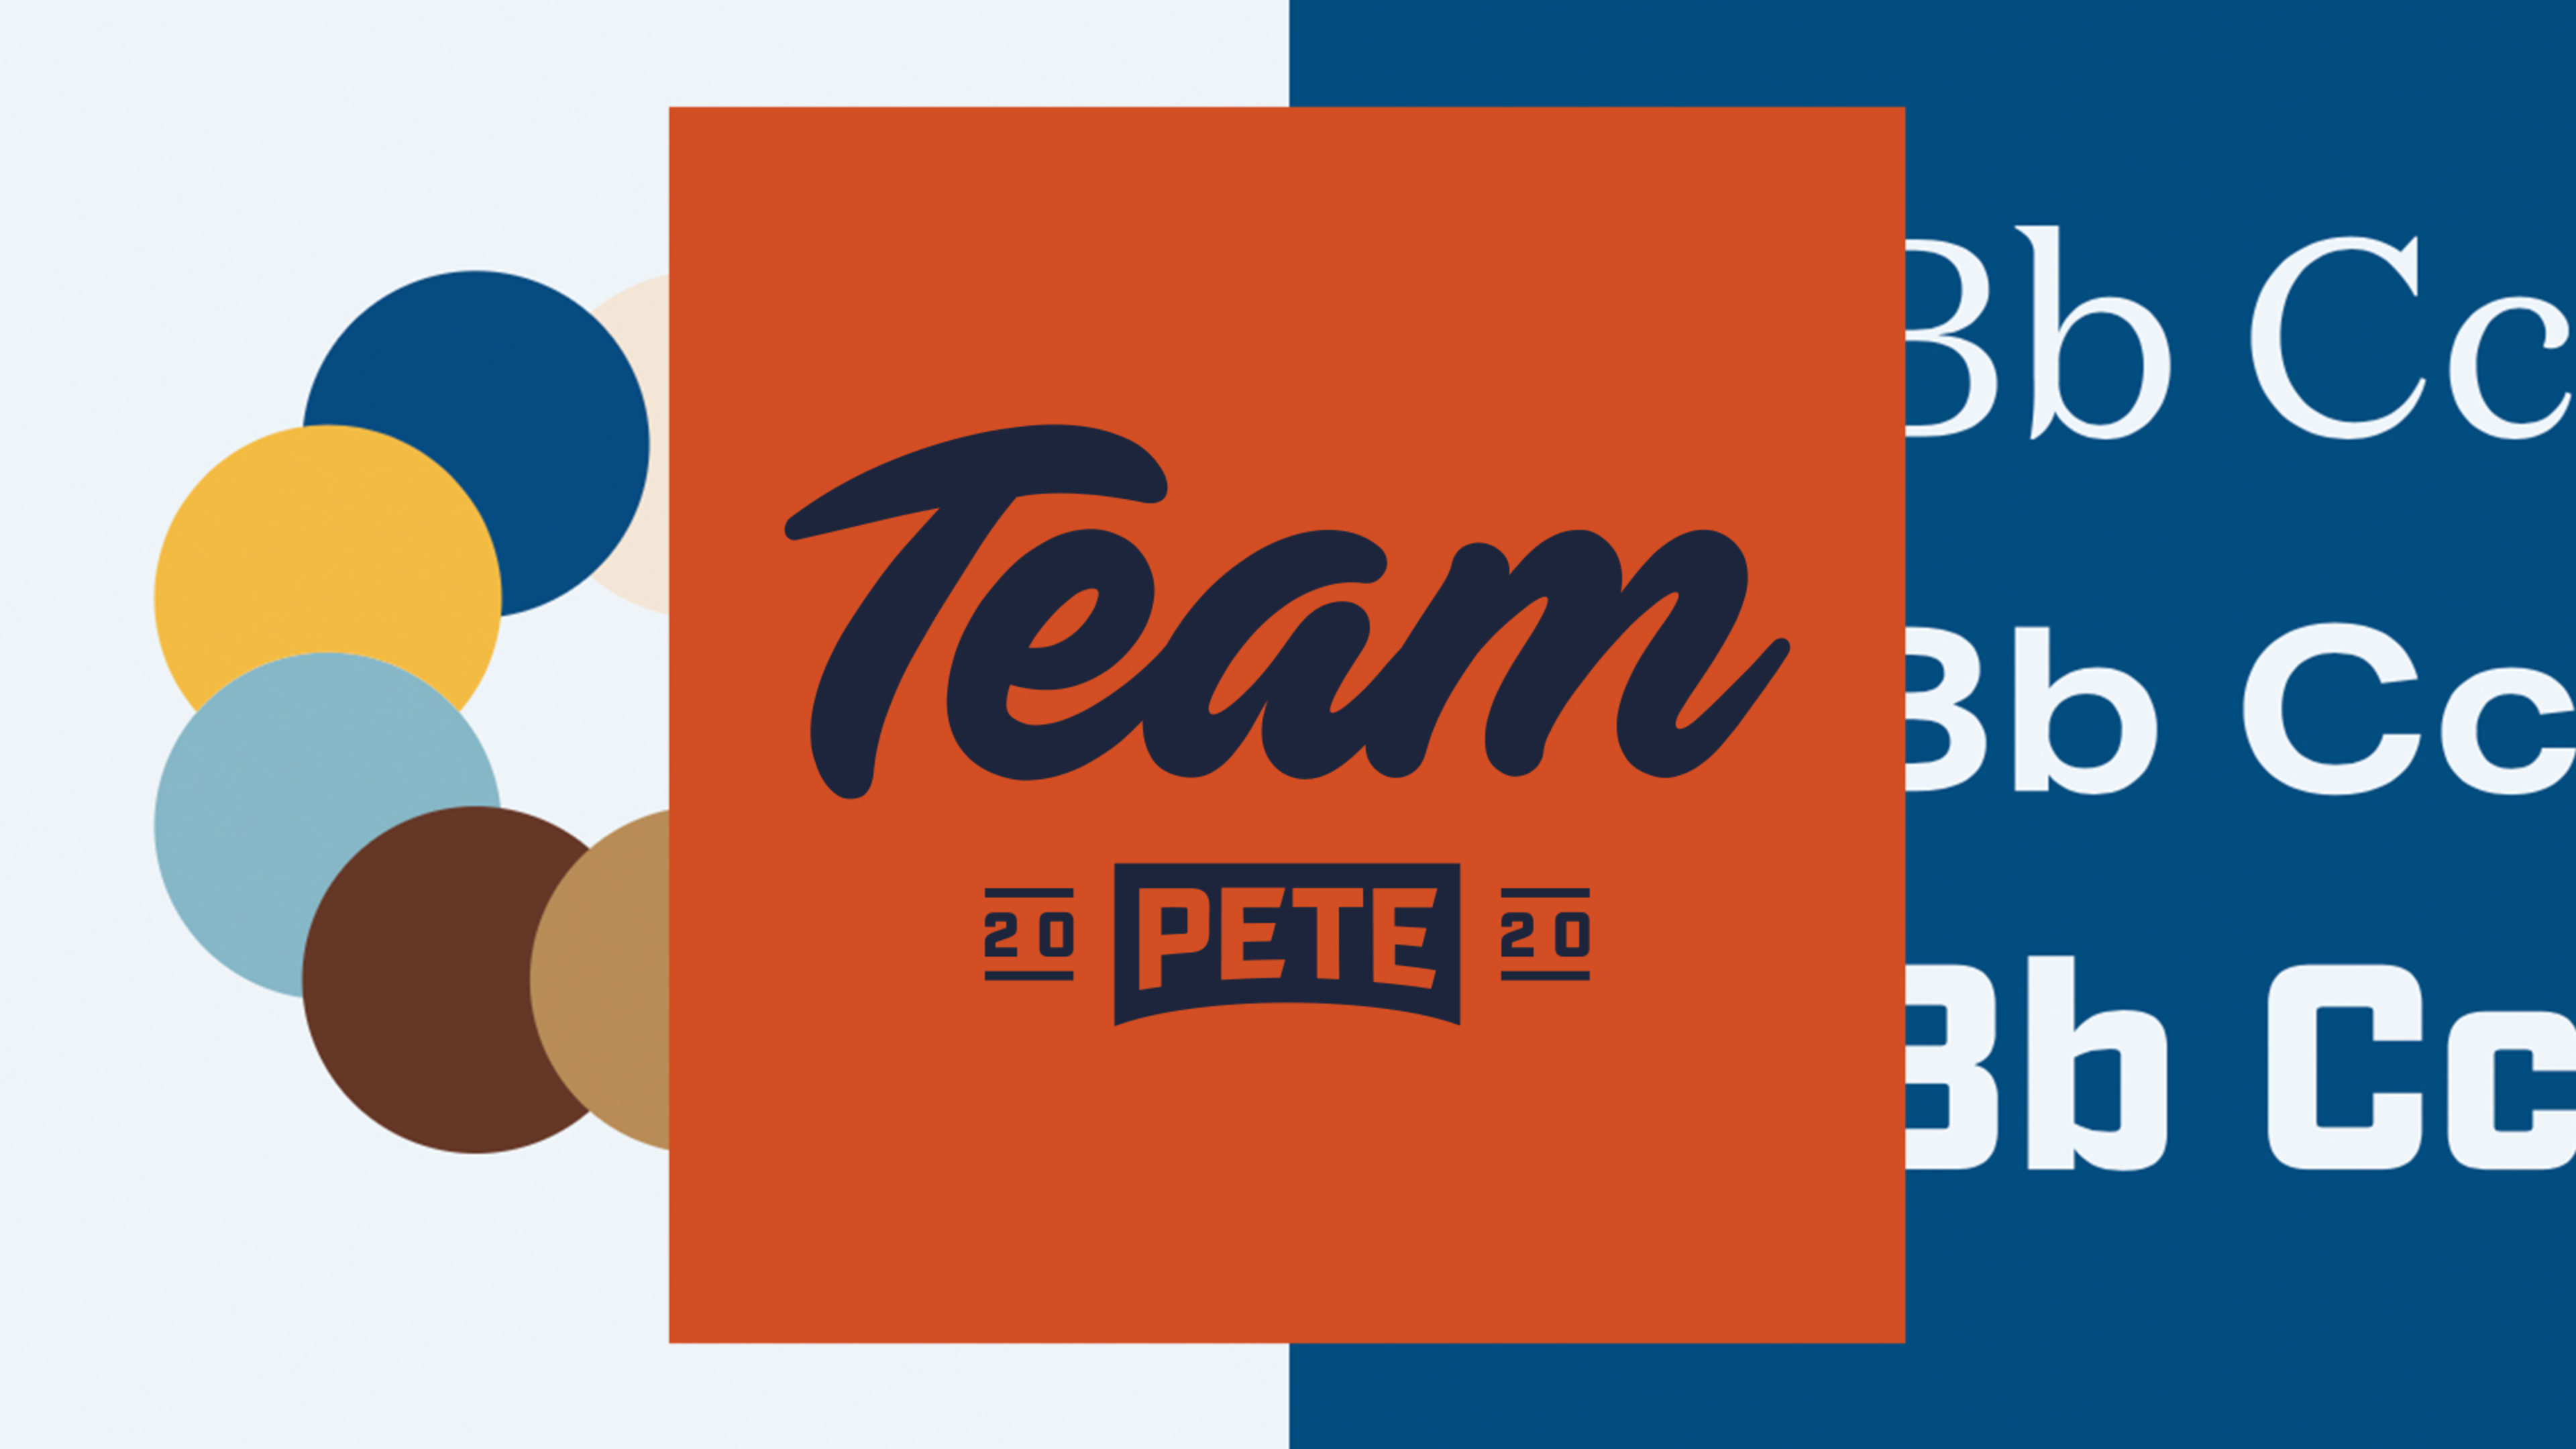 Exclusive: Pete Buttigieg debuts a radical new approach to campaign branding